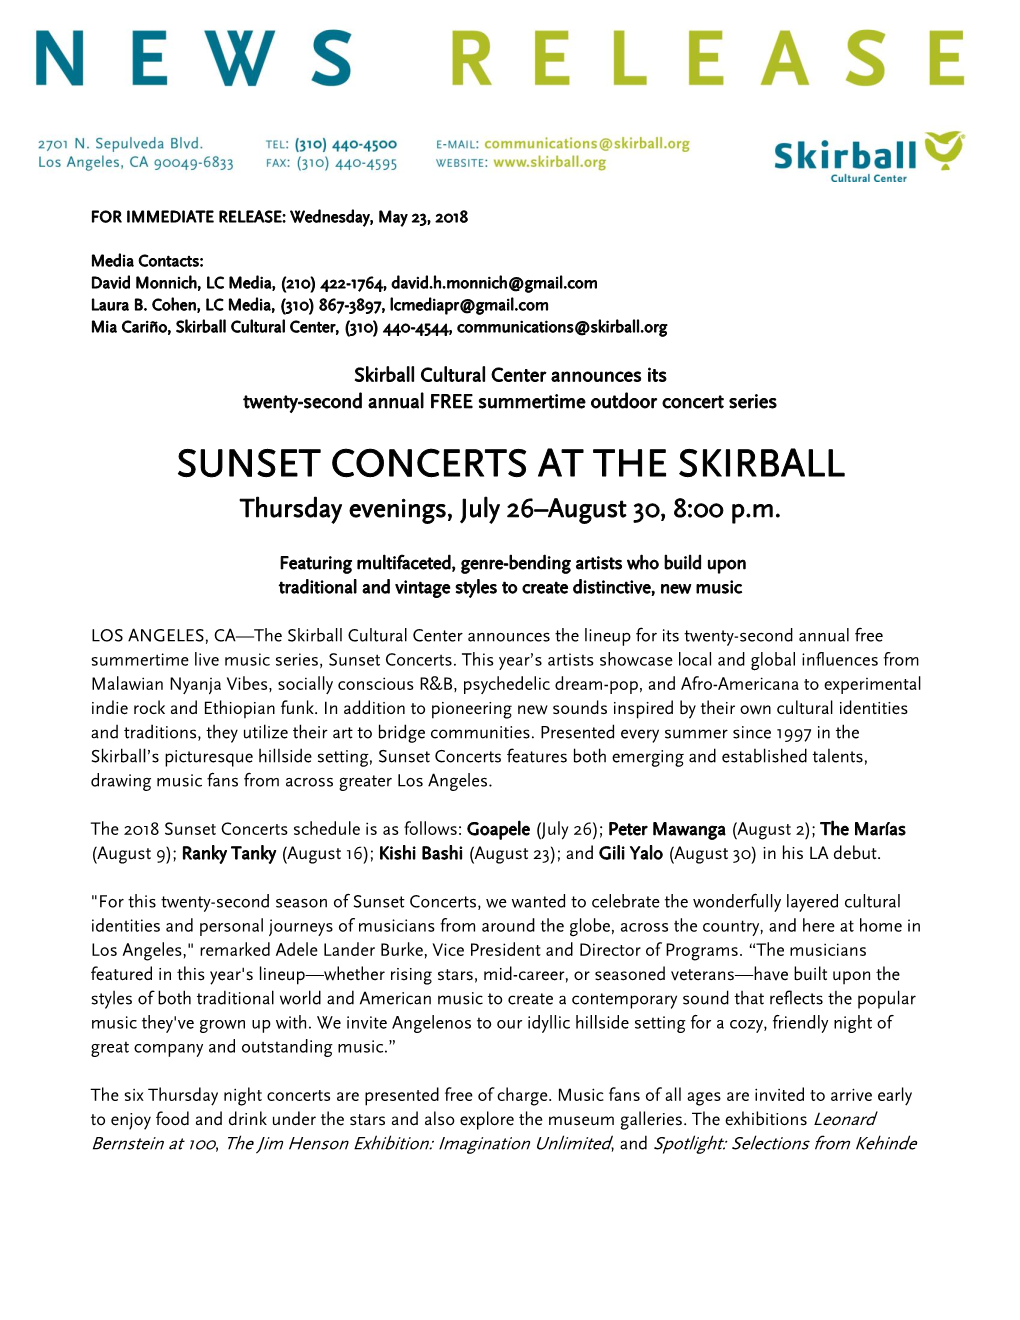 SUNSET CONCERTS at the SKIRBALL Thursday Evenings, July 26–August 30, 8:00 P.M